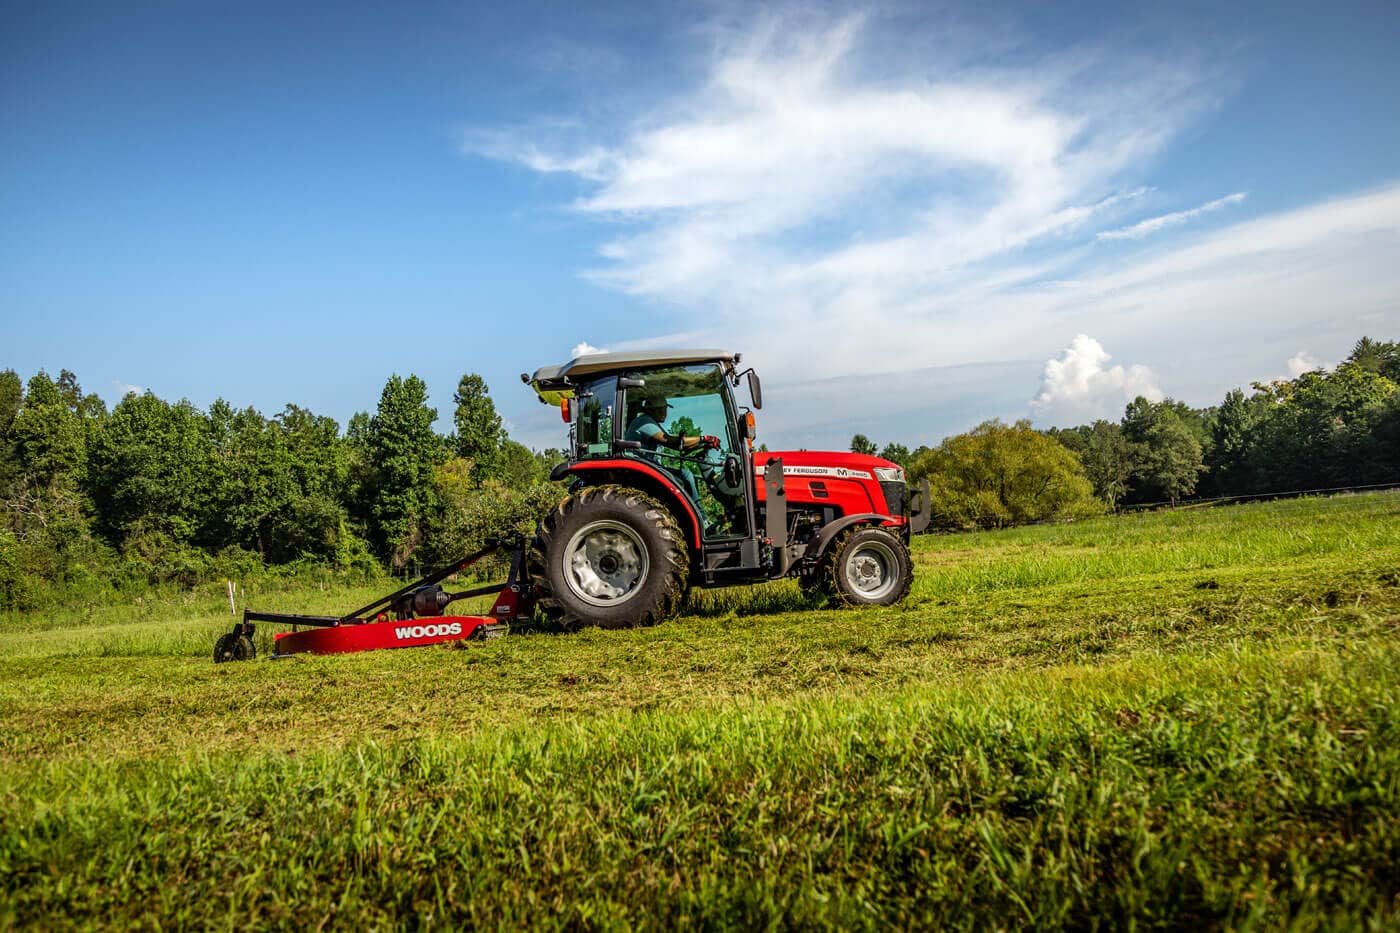 mf2860m-gallery02-2860m-cab-mowing-august-2020-cleveland-georgia-668A3938